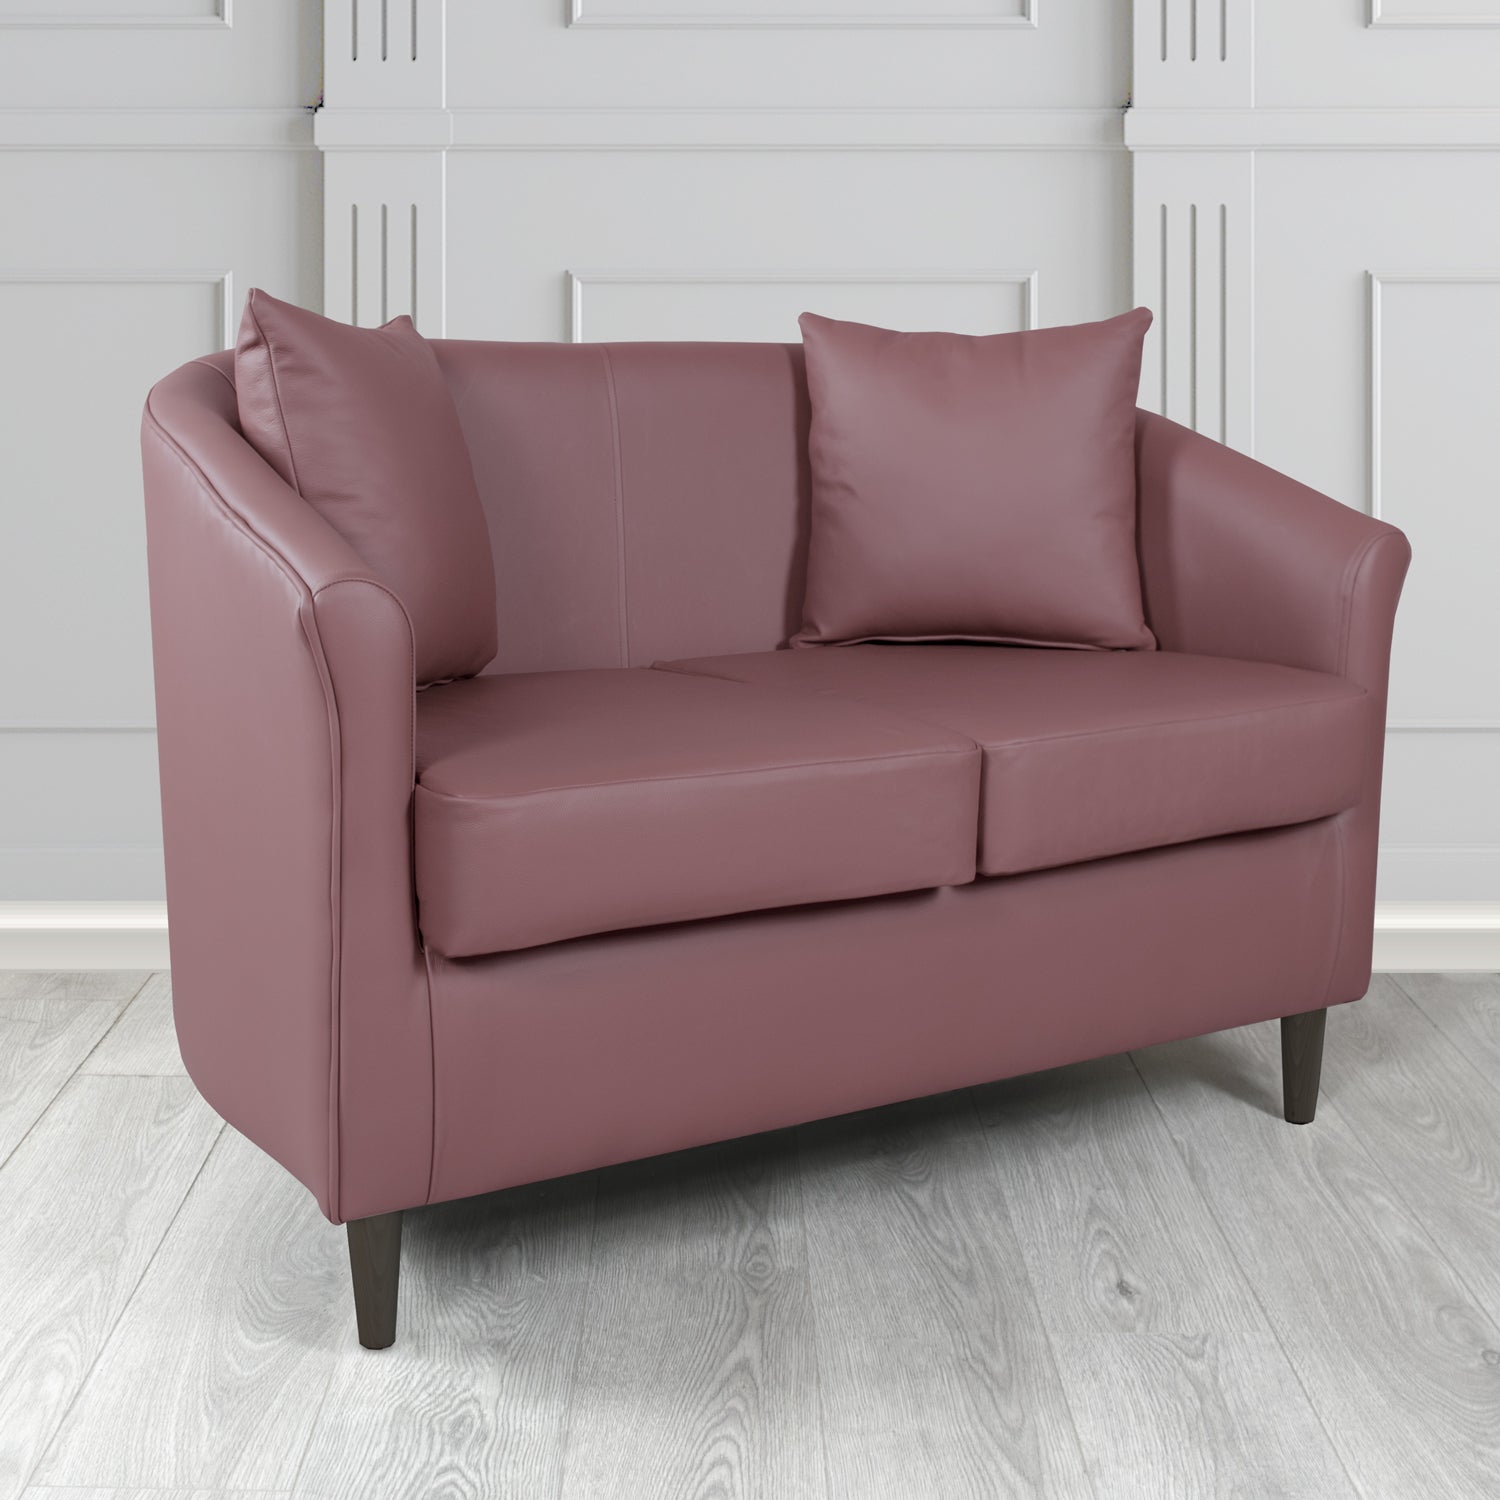 St Tropez Shelly Amethyst Crib 5 Genuine Leather 2 Seater Tub Sofa with Scatter Cushions - The Tub Chair Shop